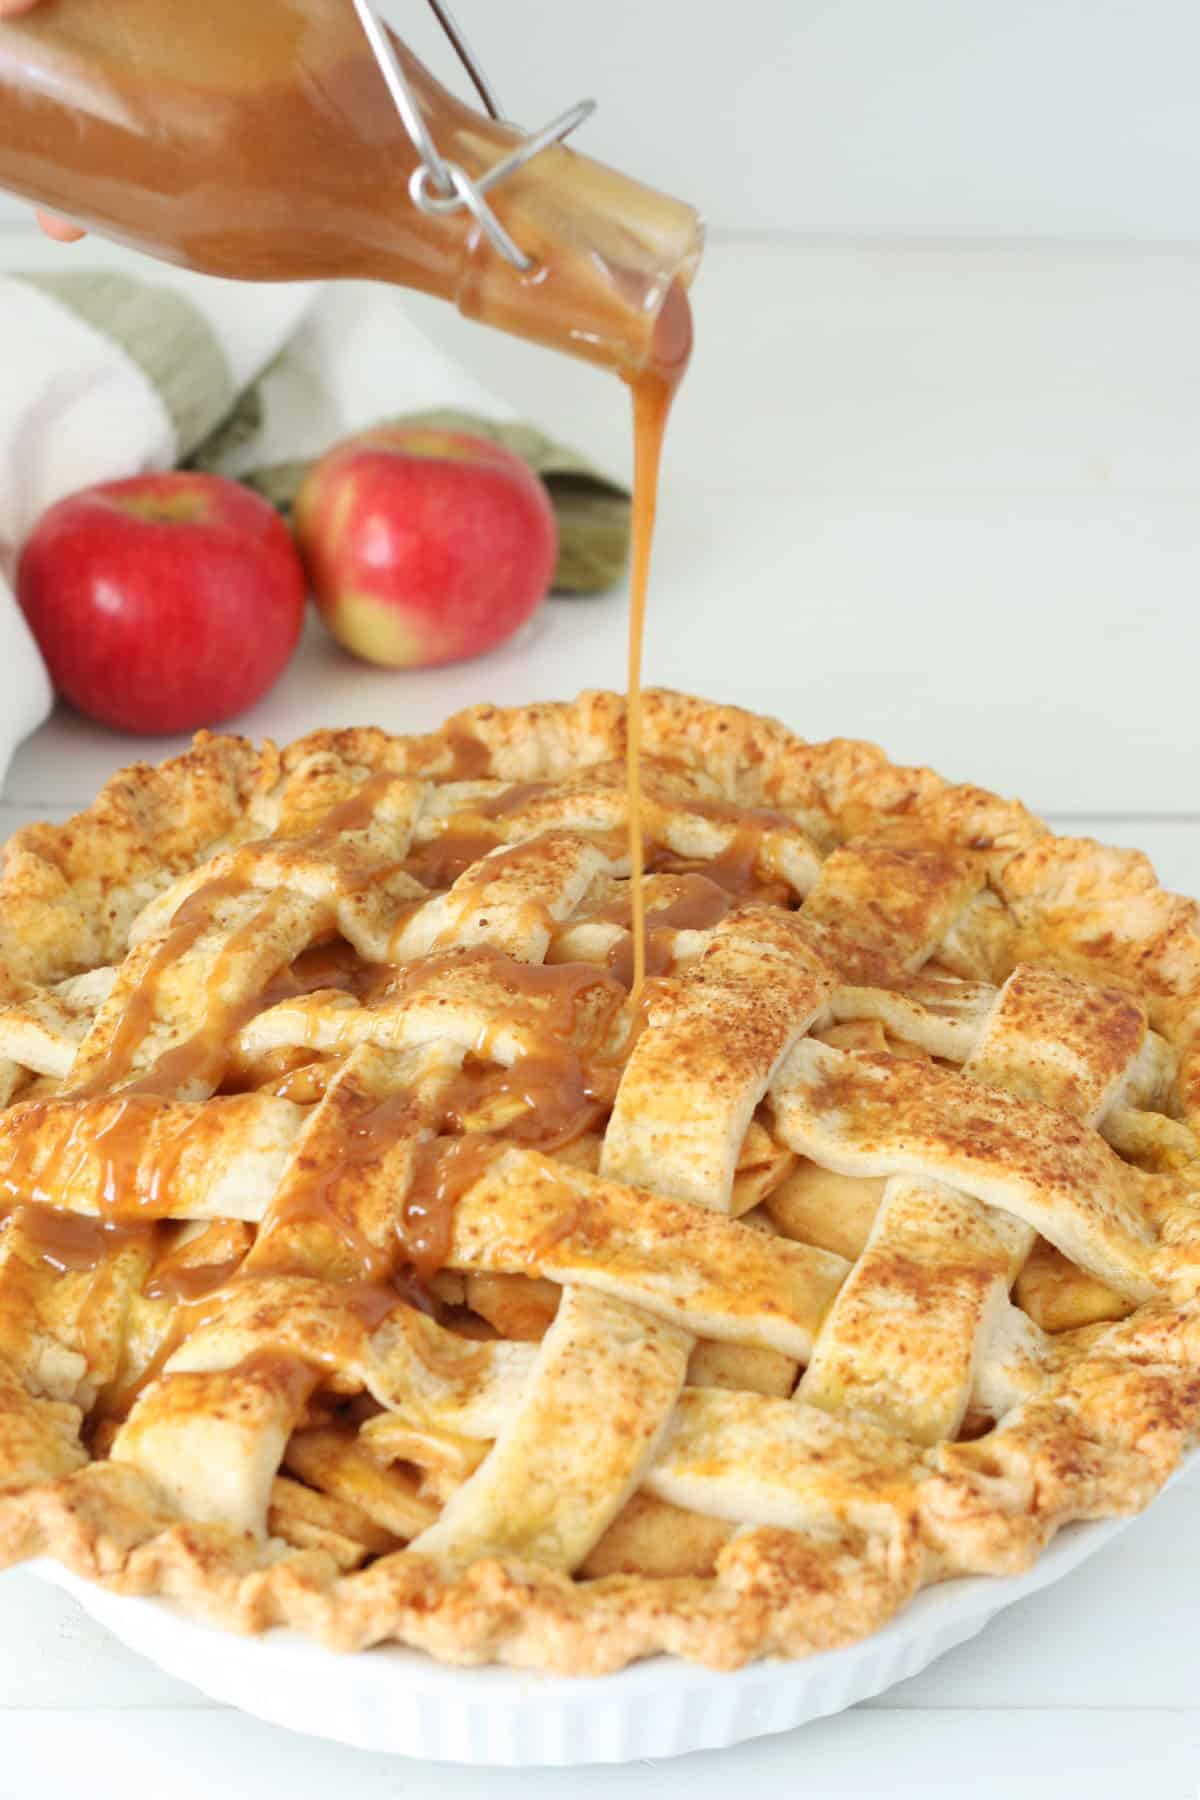 An apple pie being drizzled with homemade caramel sauce